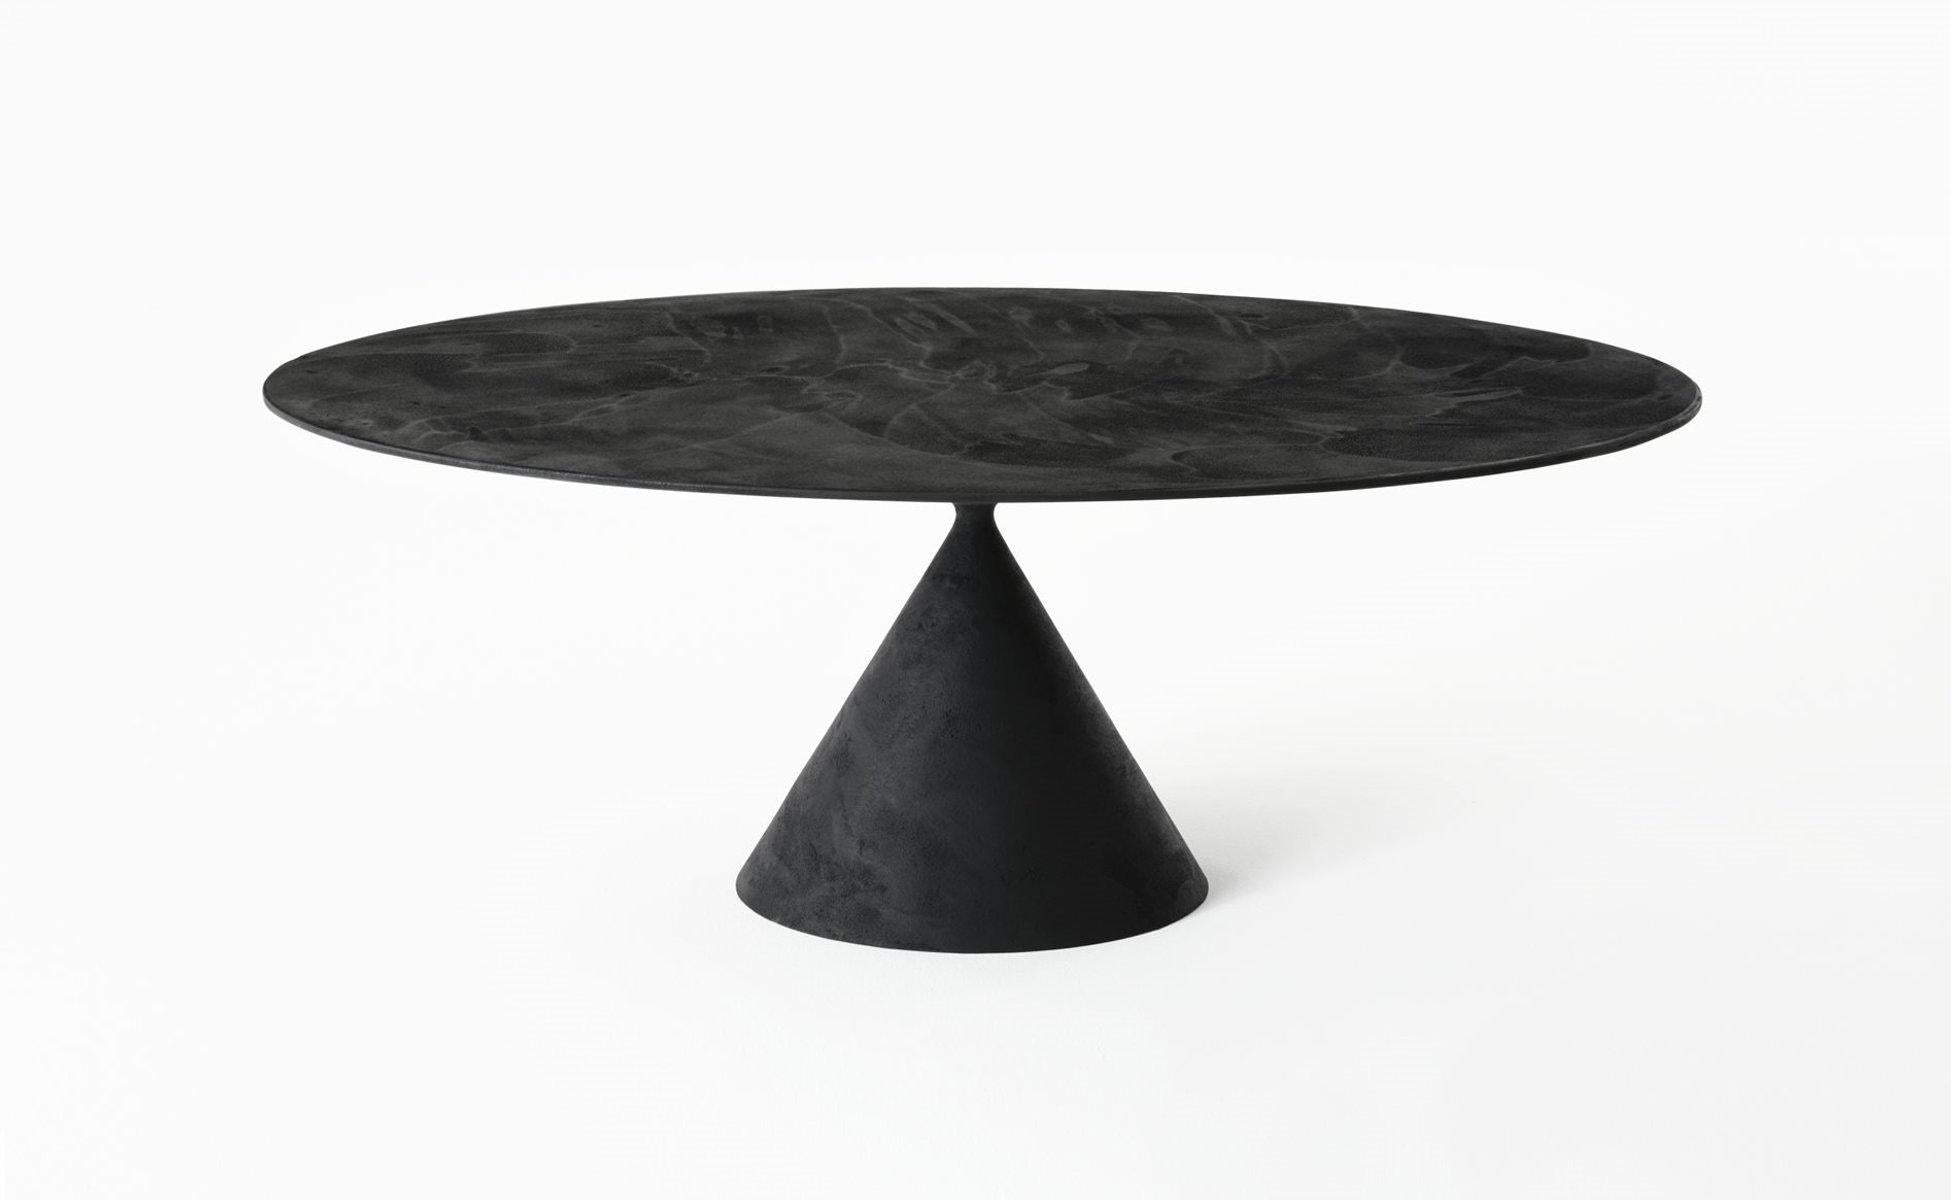 Italian APRIL Desalto OUTDOOR OVAL Clay Table  Designed by Marc Krusin